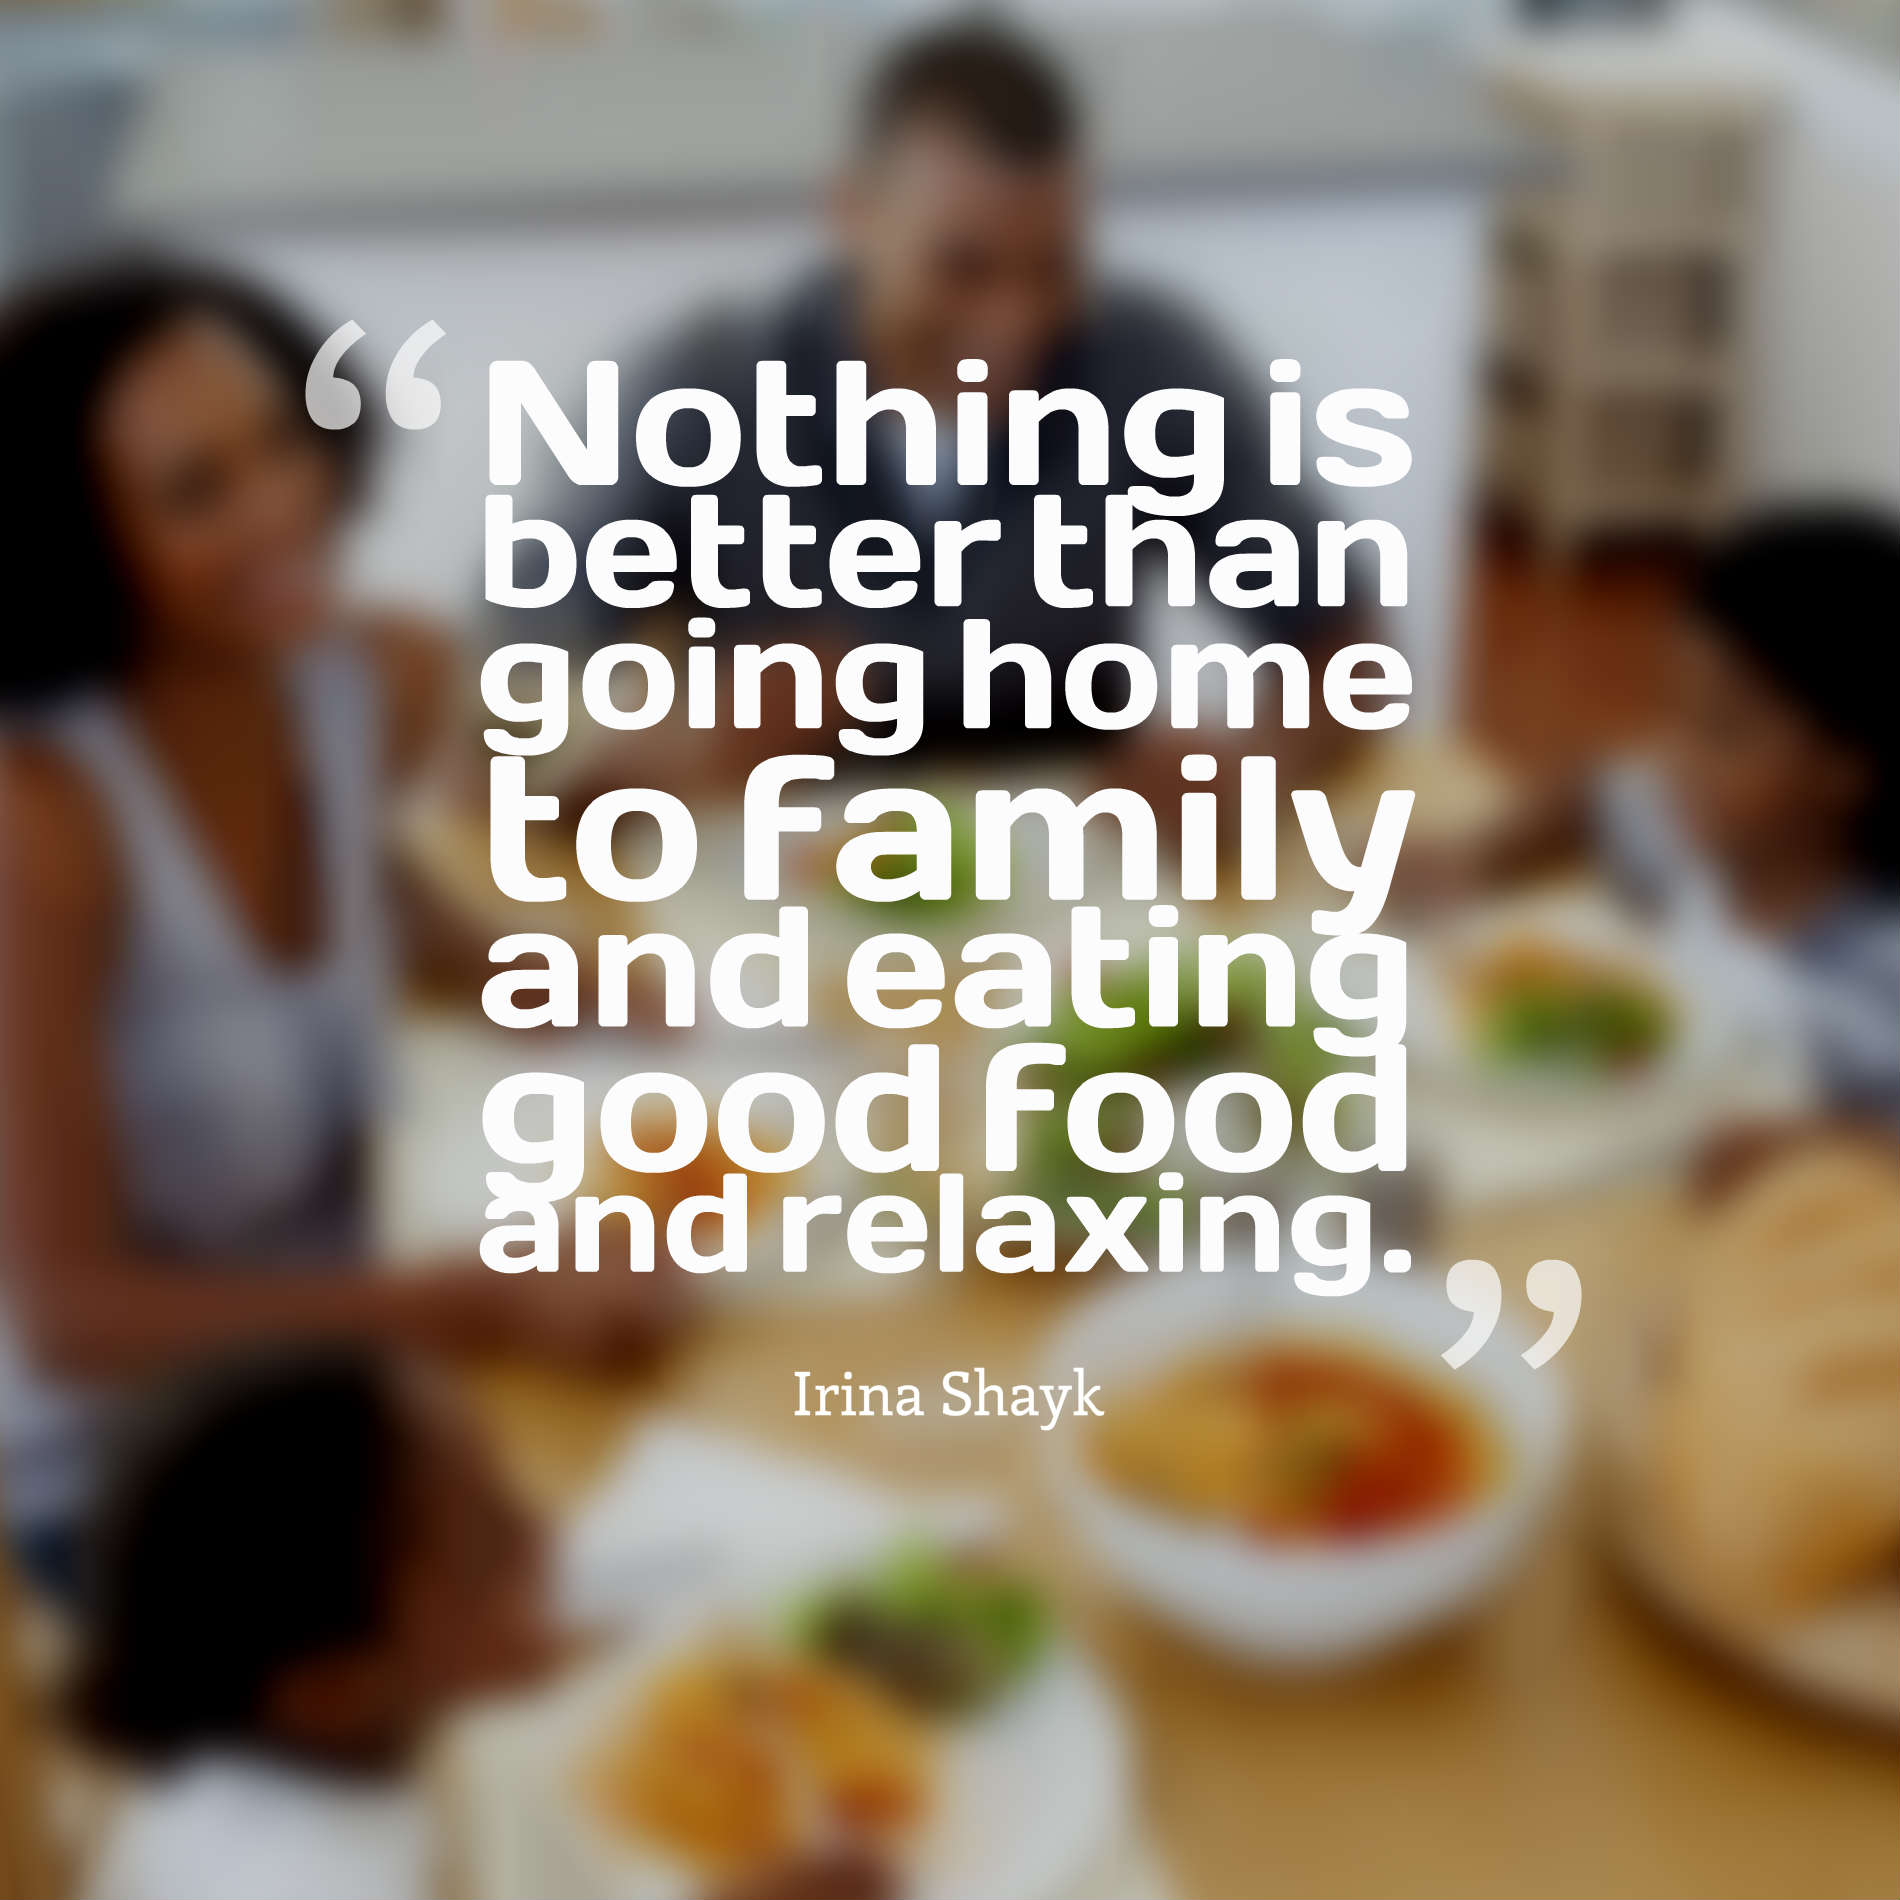 Nothing is better than going home to family and eating good food and relaxing.